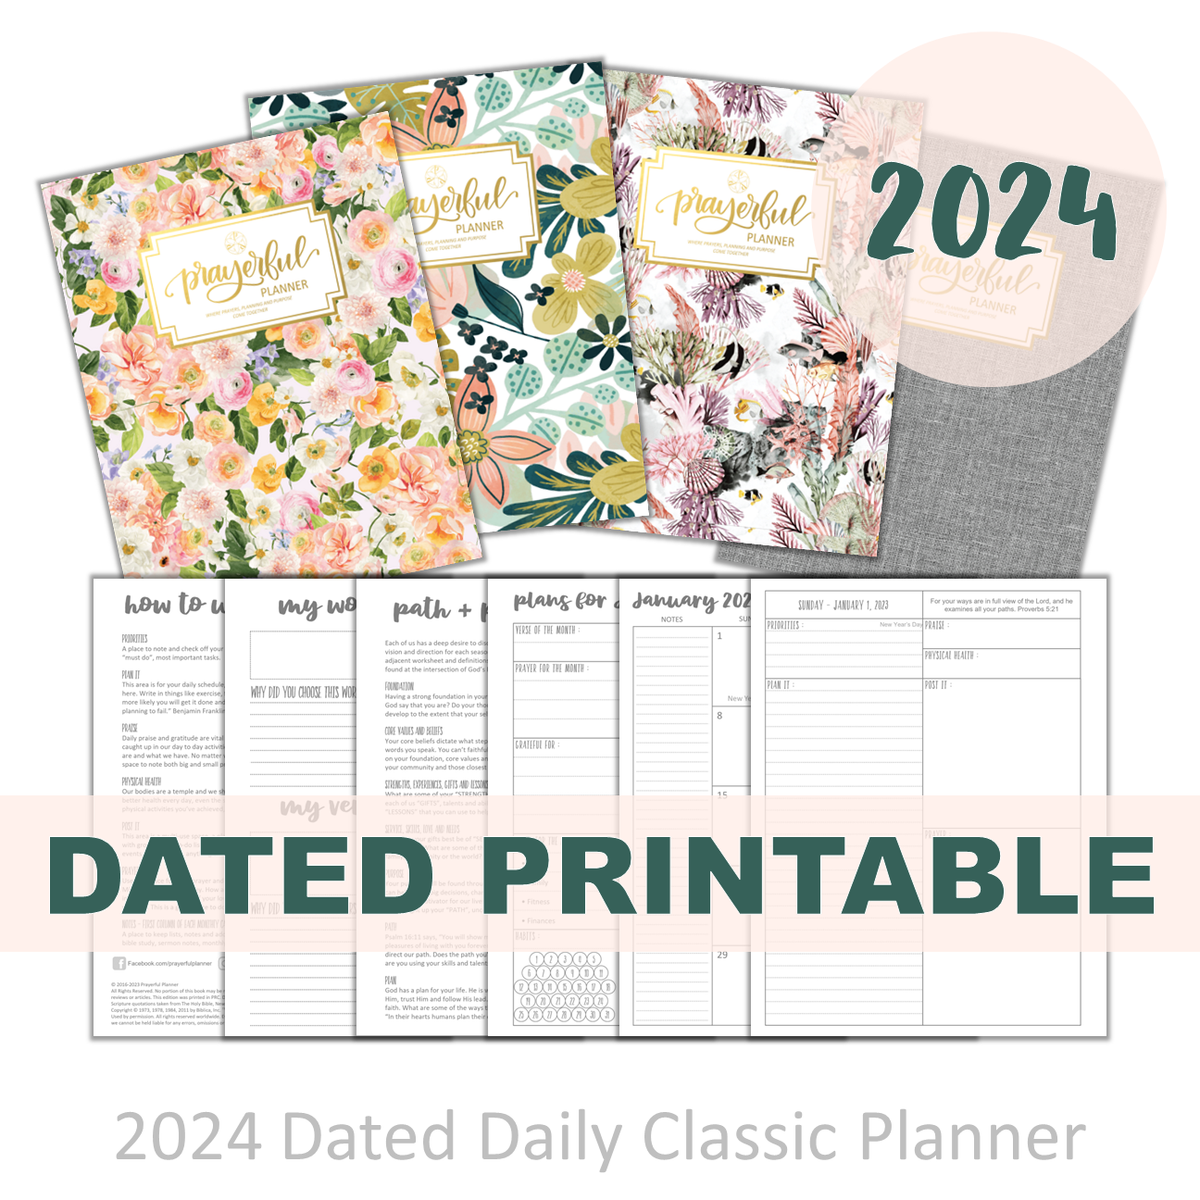 PRINTABLE 2024 Dated Planner Classic Size Prayerful Planner